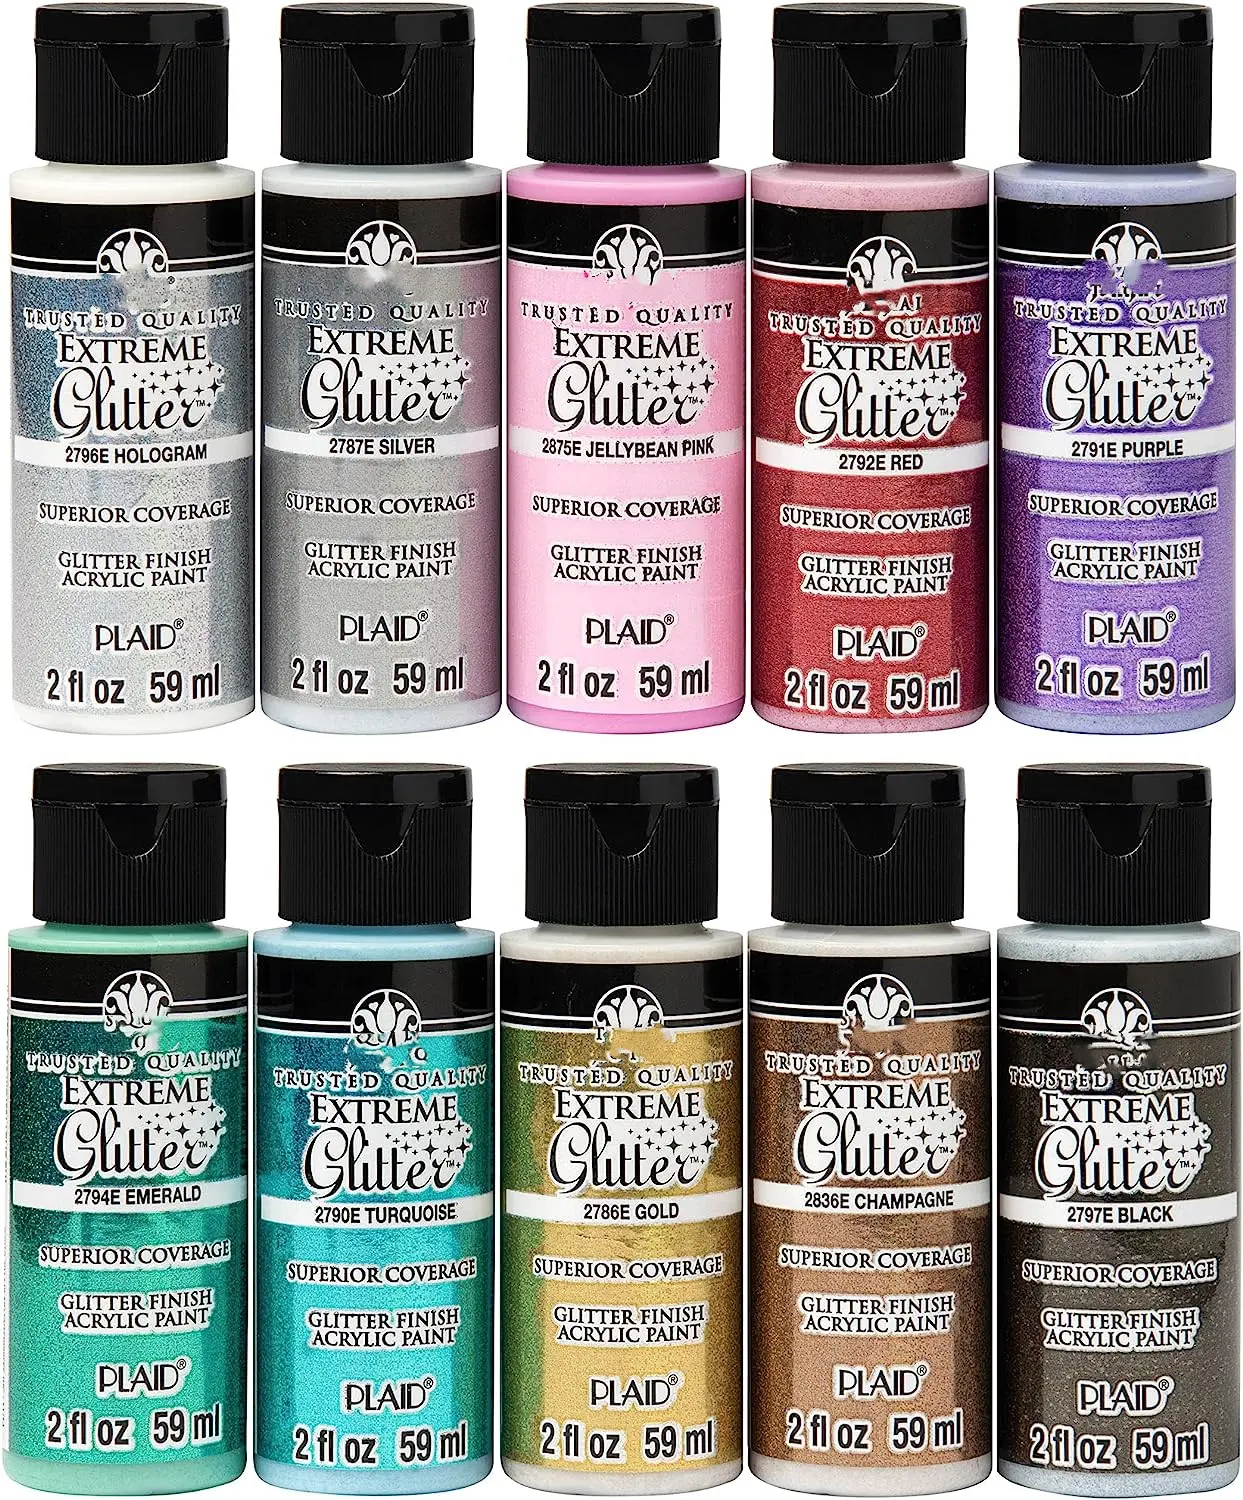 Formulated to be Non-Toxic and Designed for Beginners and Artists Ten 2 Oz/59ml/Bottle Extreme Glitter Acrylic Craft Paint Set